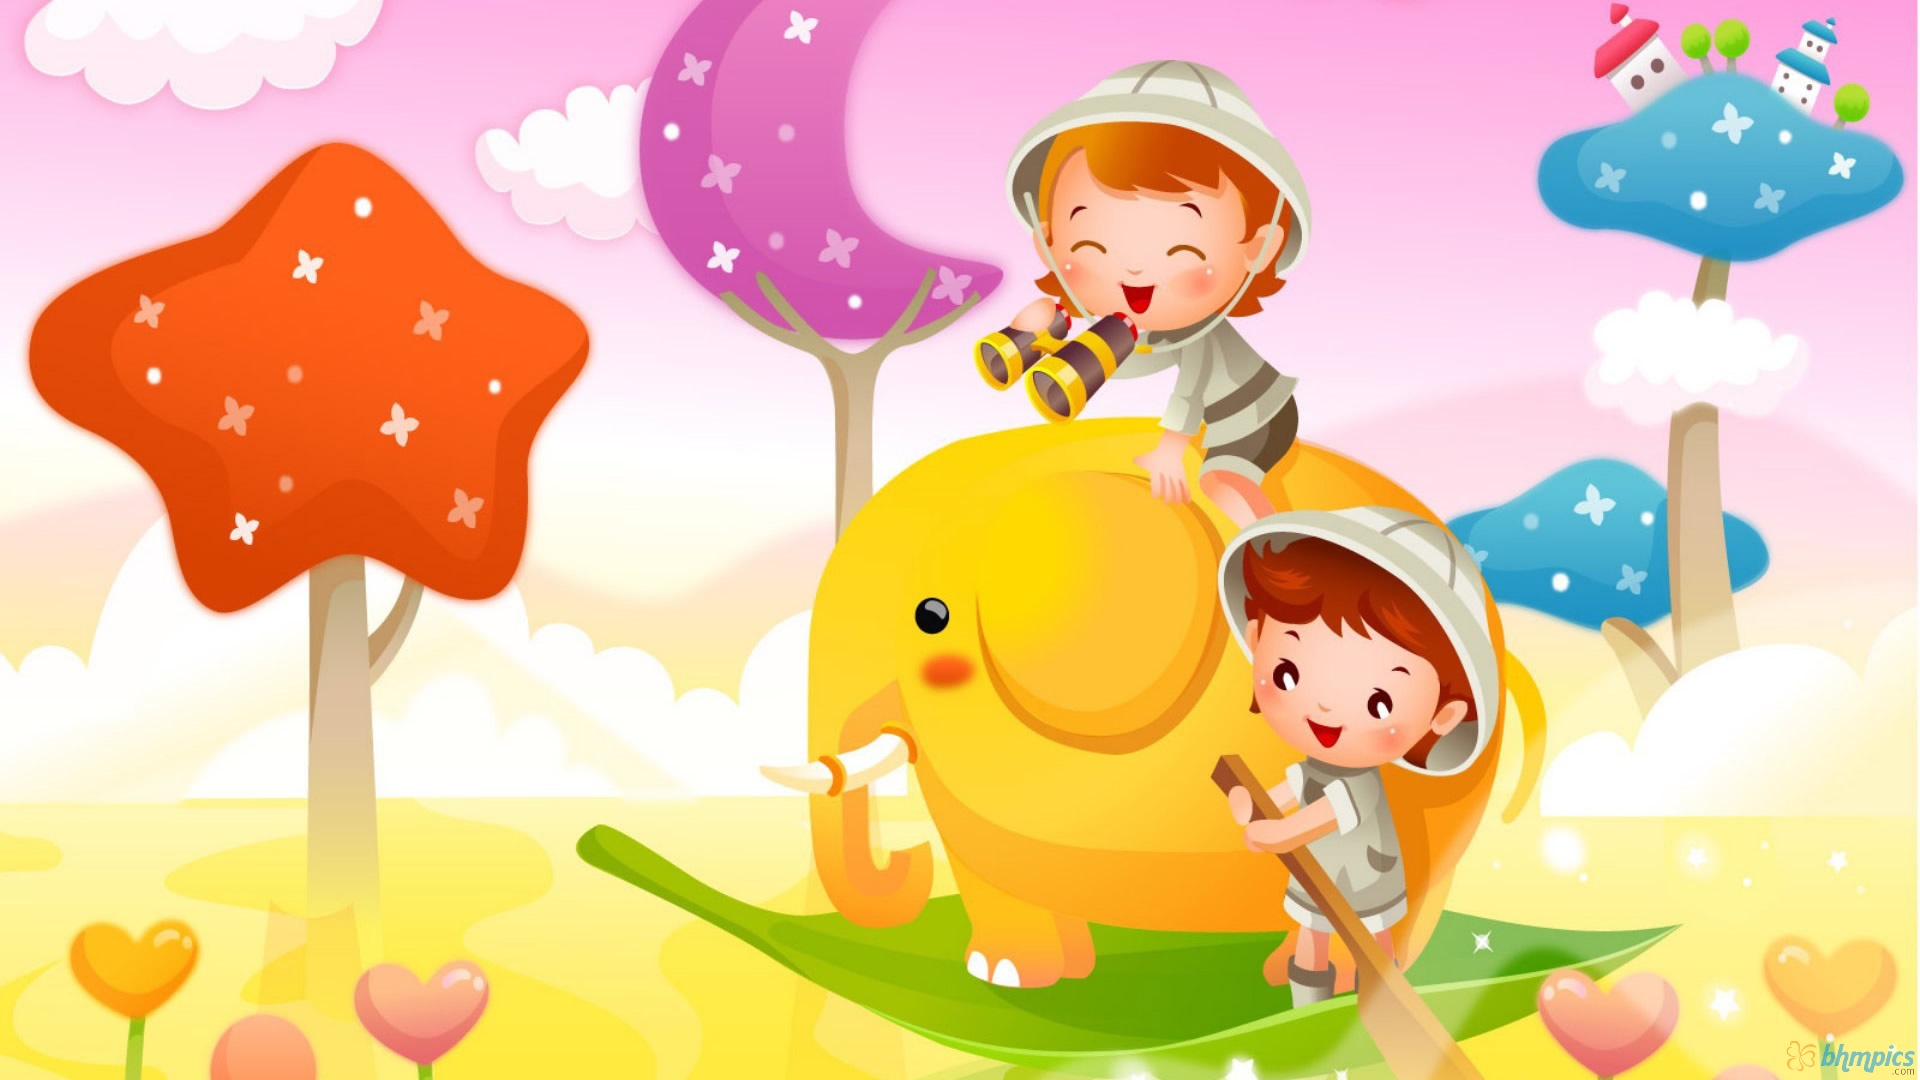 Free download Cartoon Backgrounds Cute [1920x1080] for your ...